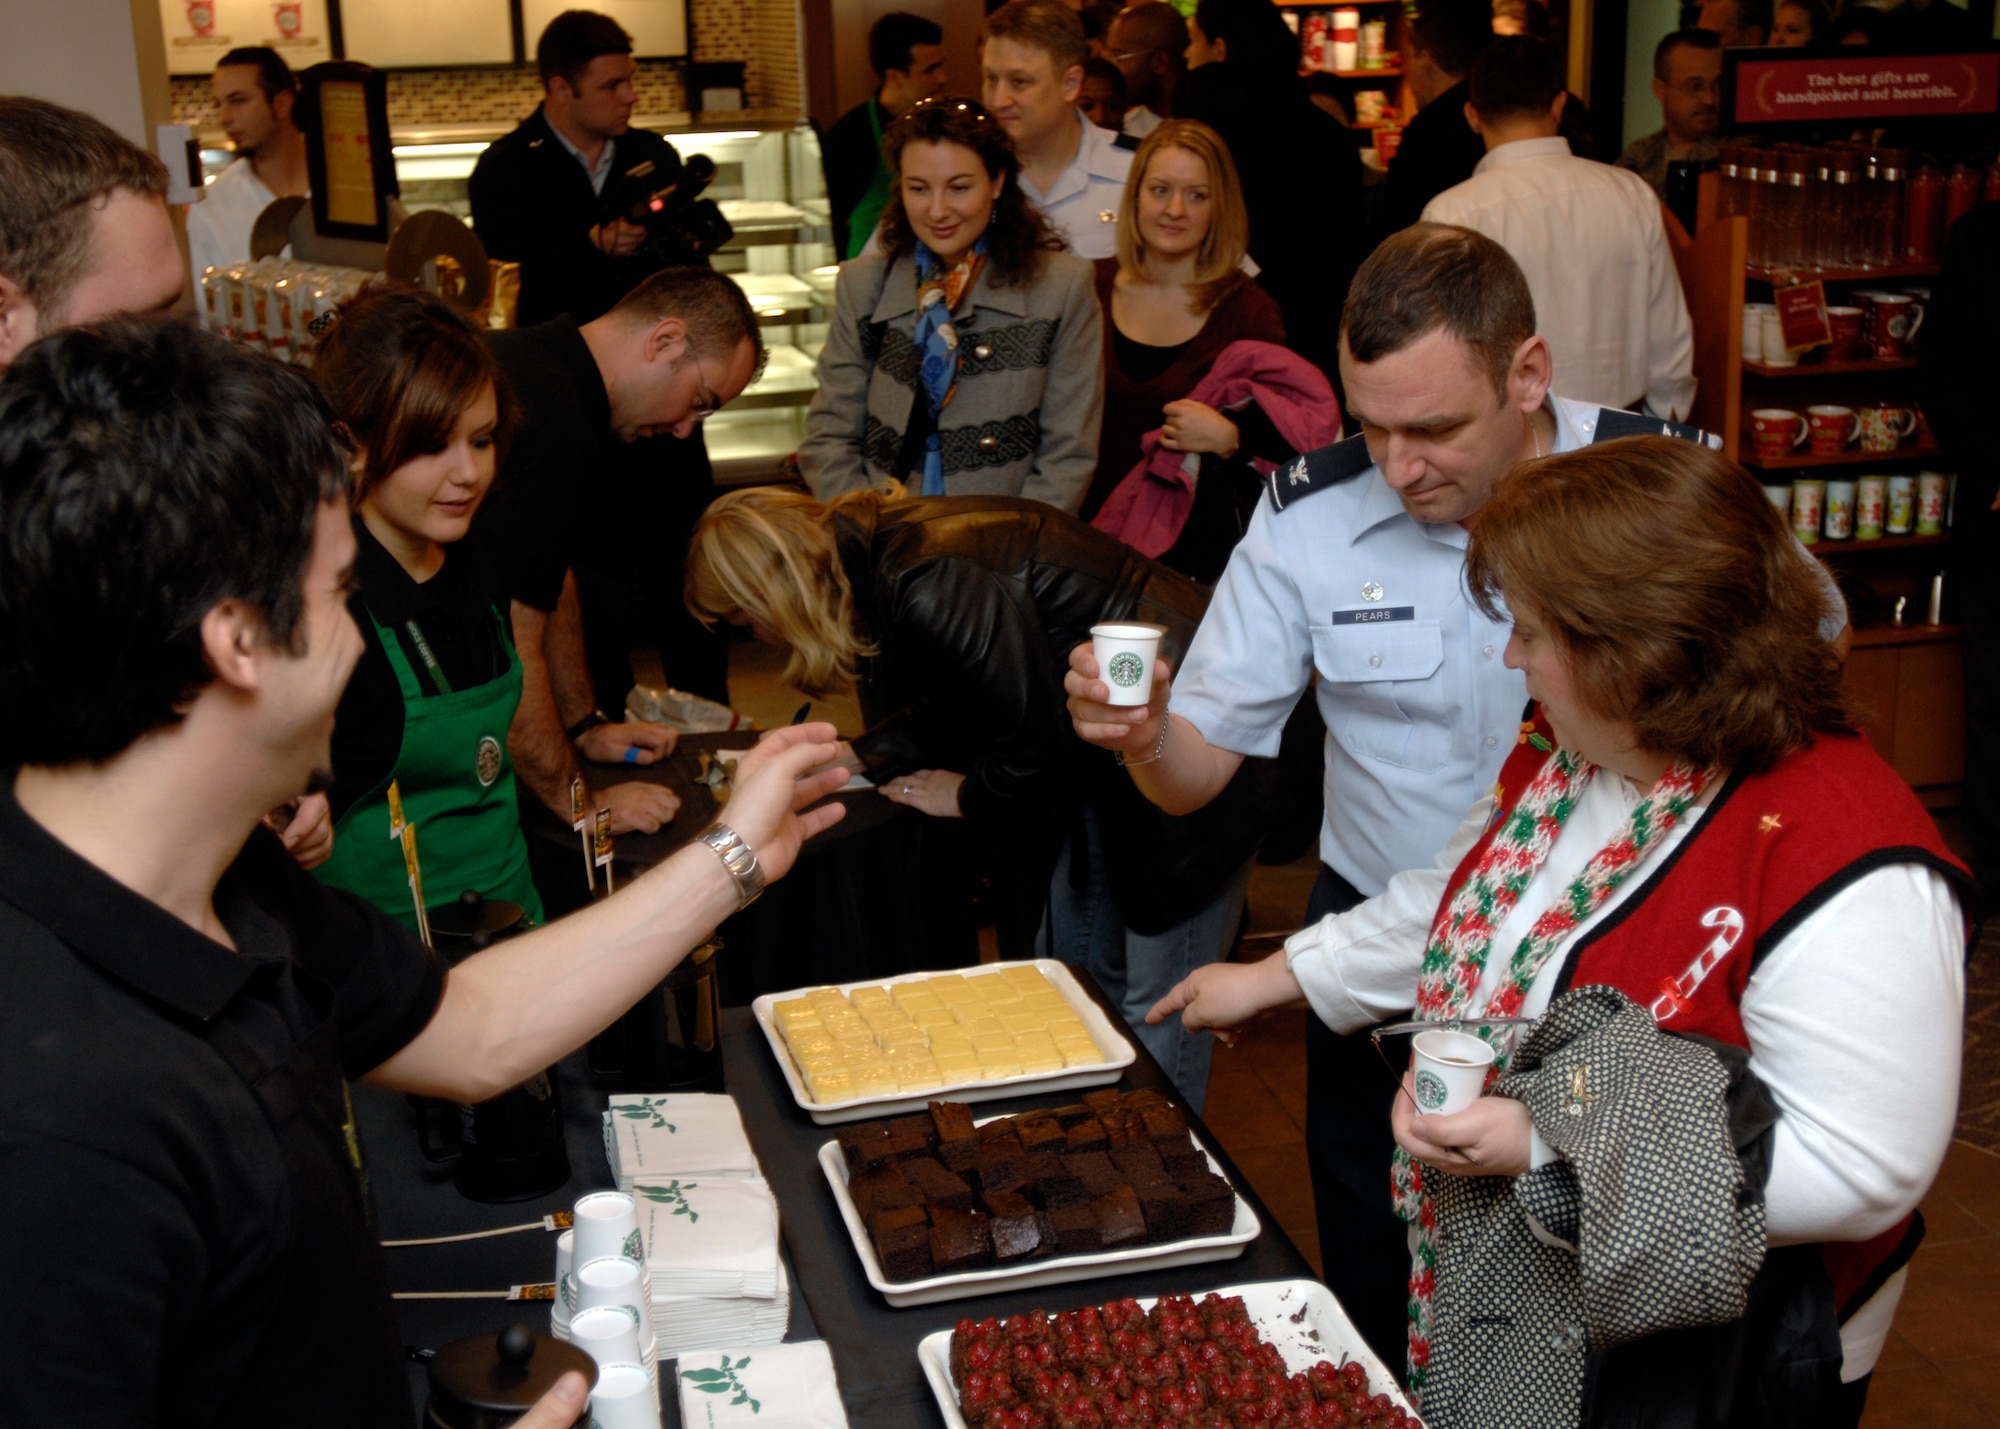 Certain Incirlik personnel sample desserts and coffee during the “soft opening” of the first Starbucks in United States Air Forces Europe Dec. 21. (U.S. Air Force photo by Master Sgt. Edward Holzapfel)